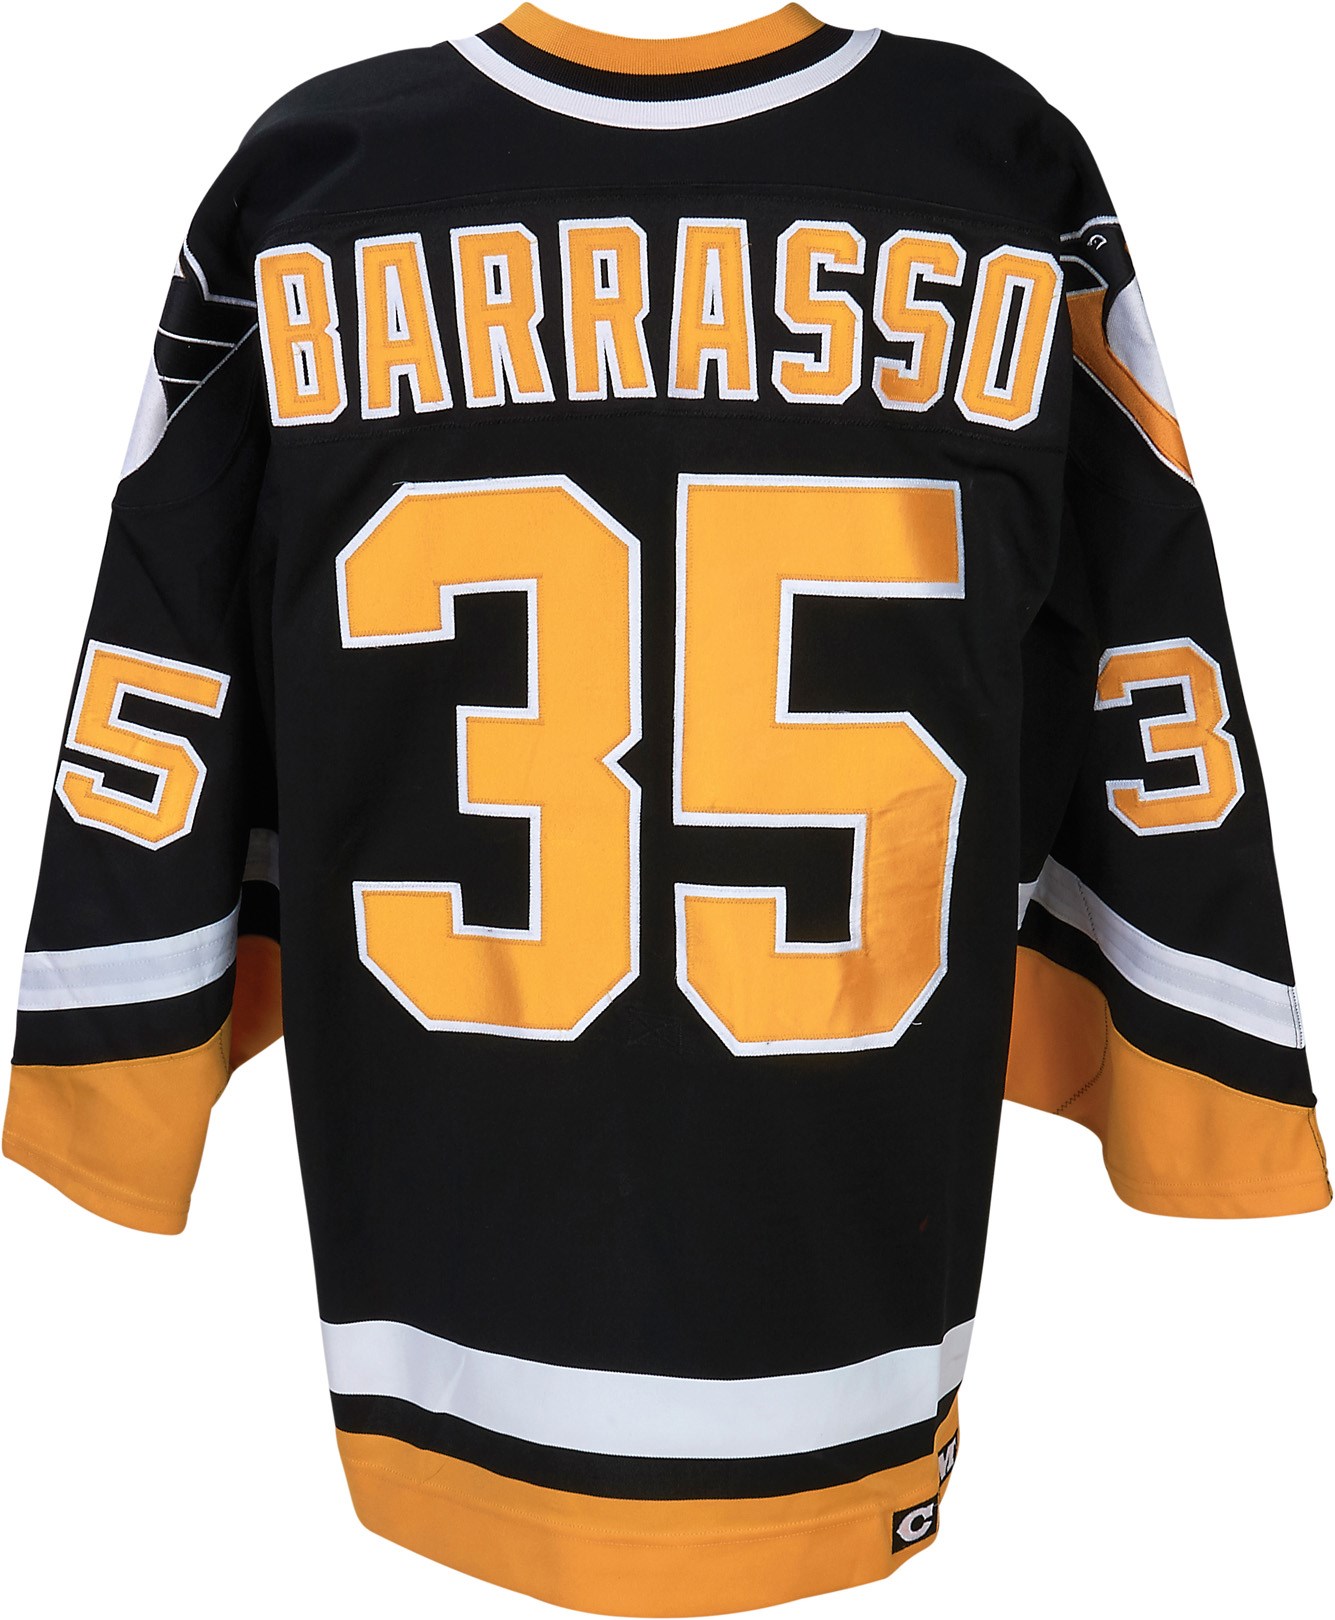 - 1996-97 Tom Barrasso Pittsburgh Penguins Game Worn Jersey (Photo-Matched)